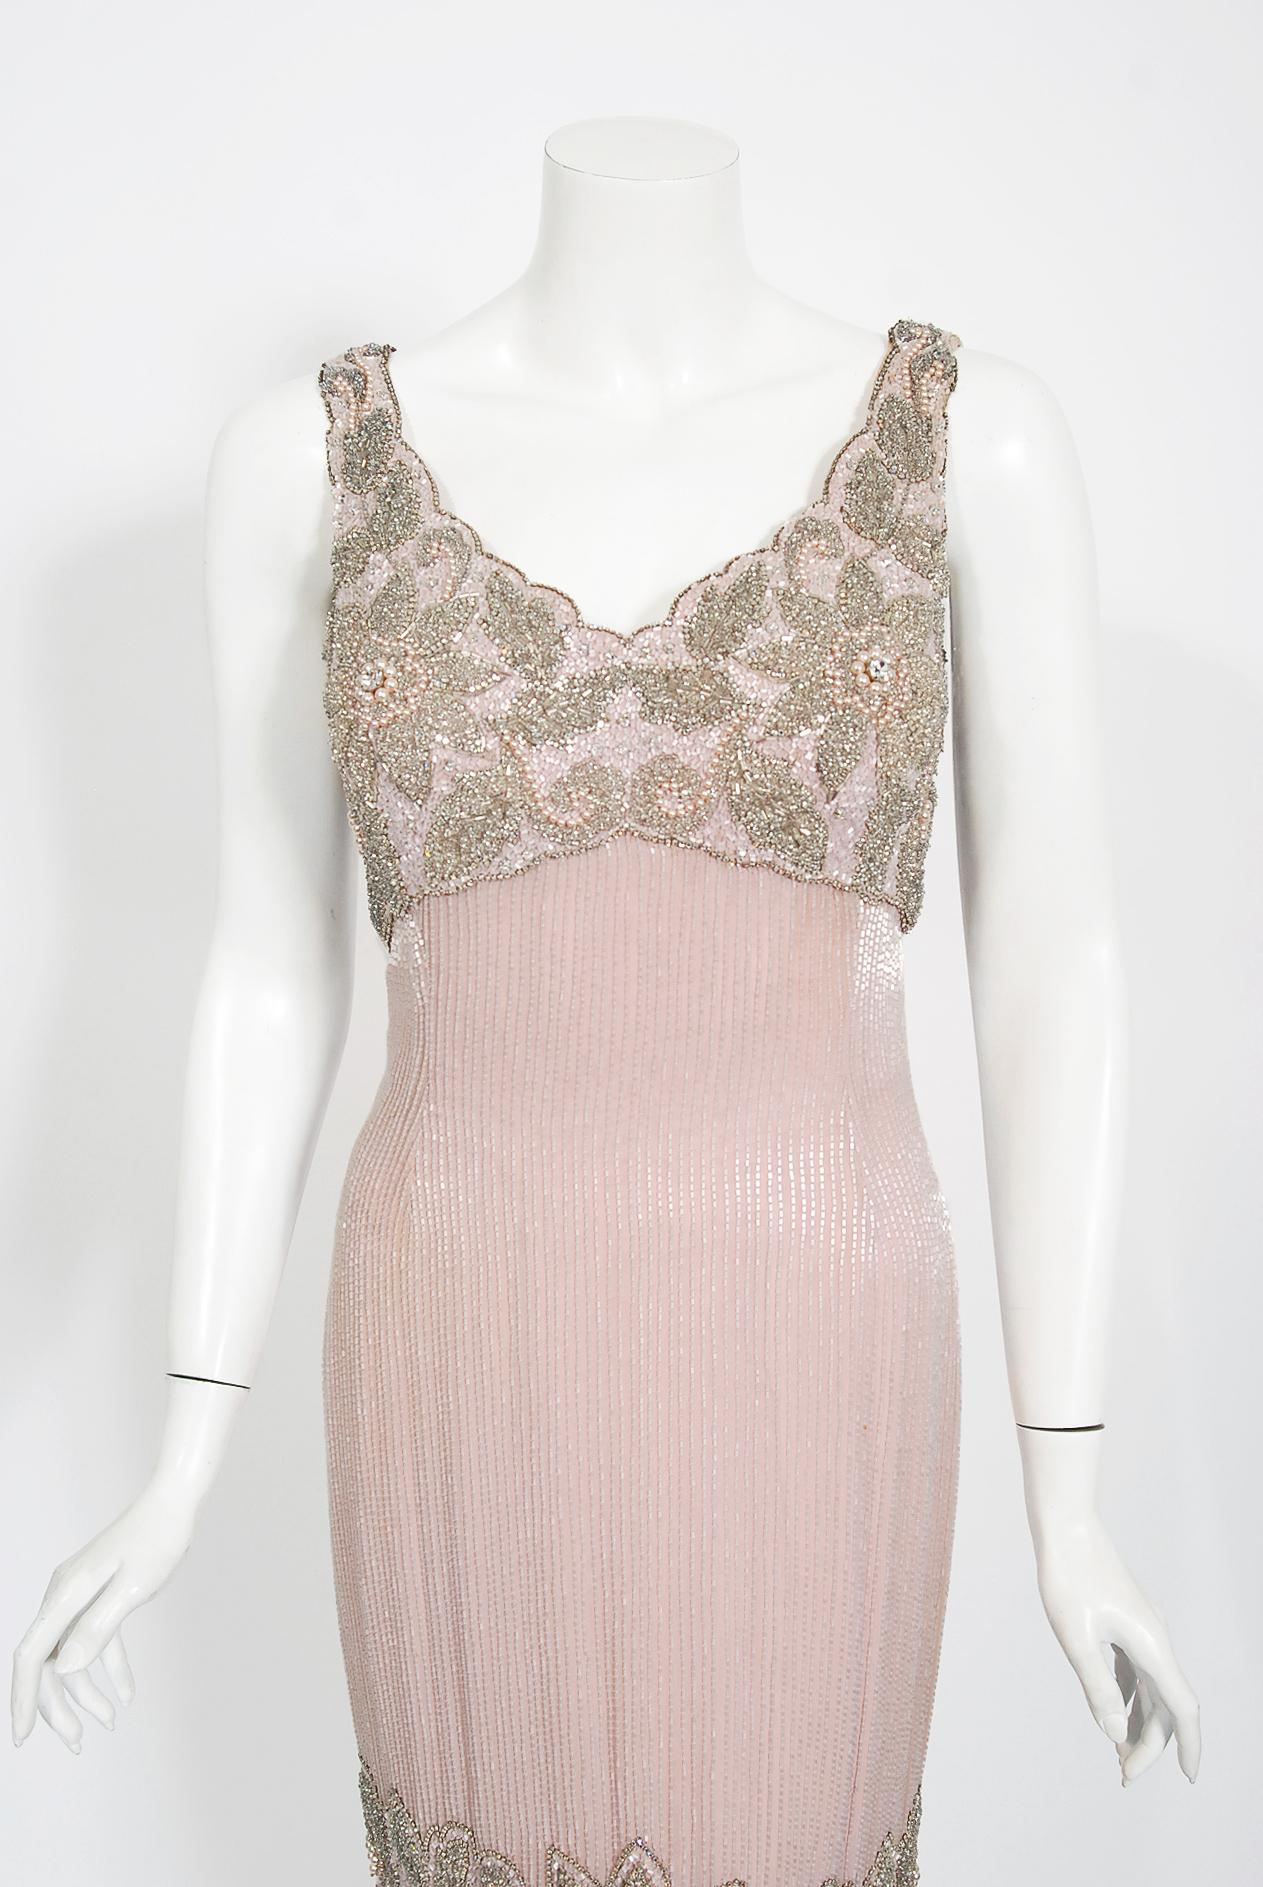 Breathtaking and incredibly rare Helen Rose designer couture blush-pink beaded cocktail dress dating back to the early 1960's Old Hollywood era. Helen Rose won two Academy Awards for Best Costume Design: for 